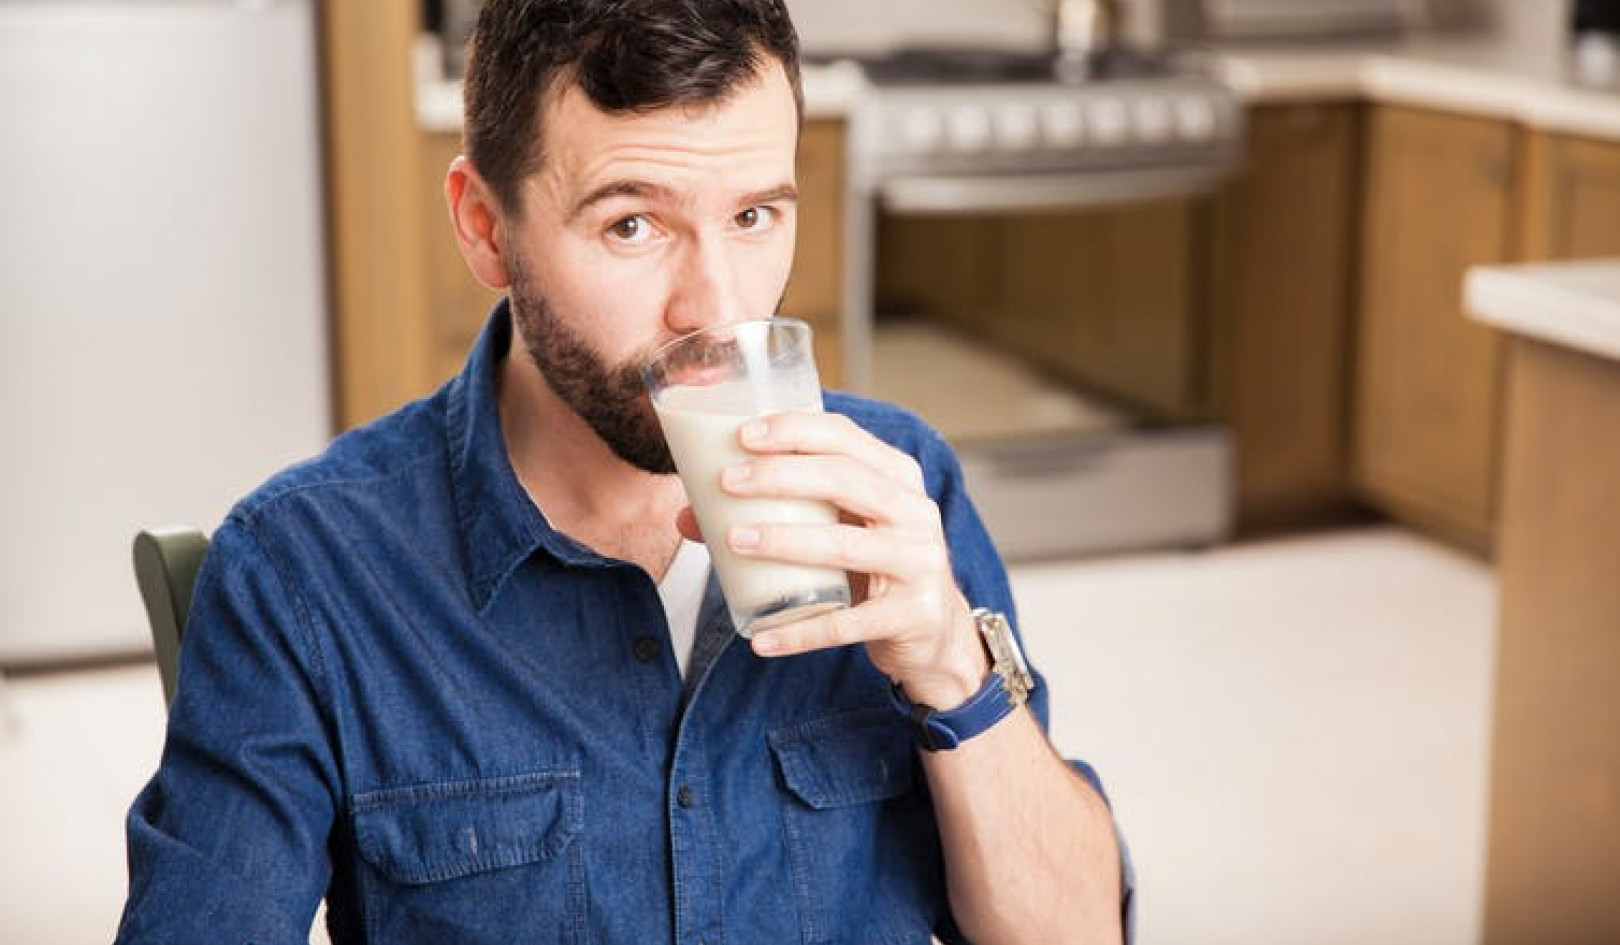 Does Eating Dairy Foods Increase Your Risk Of Prostate Cancer?